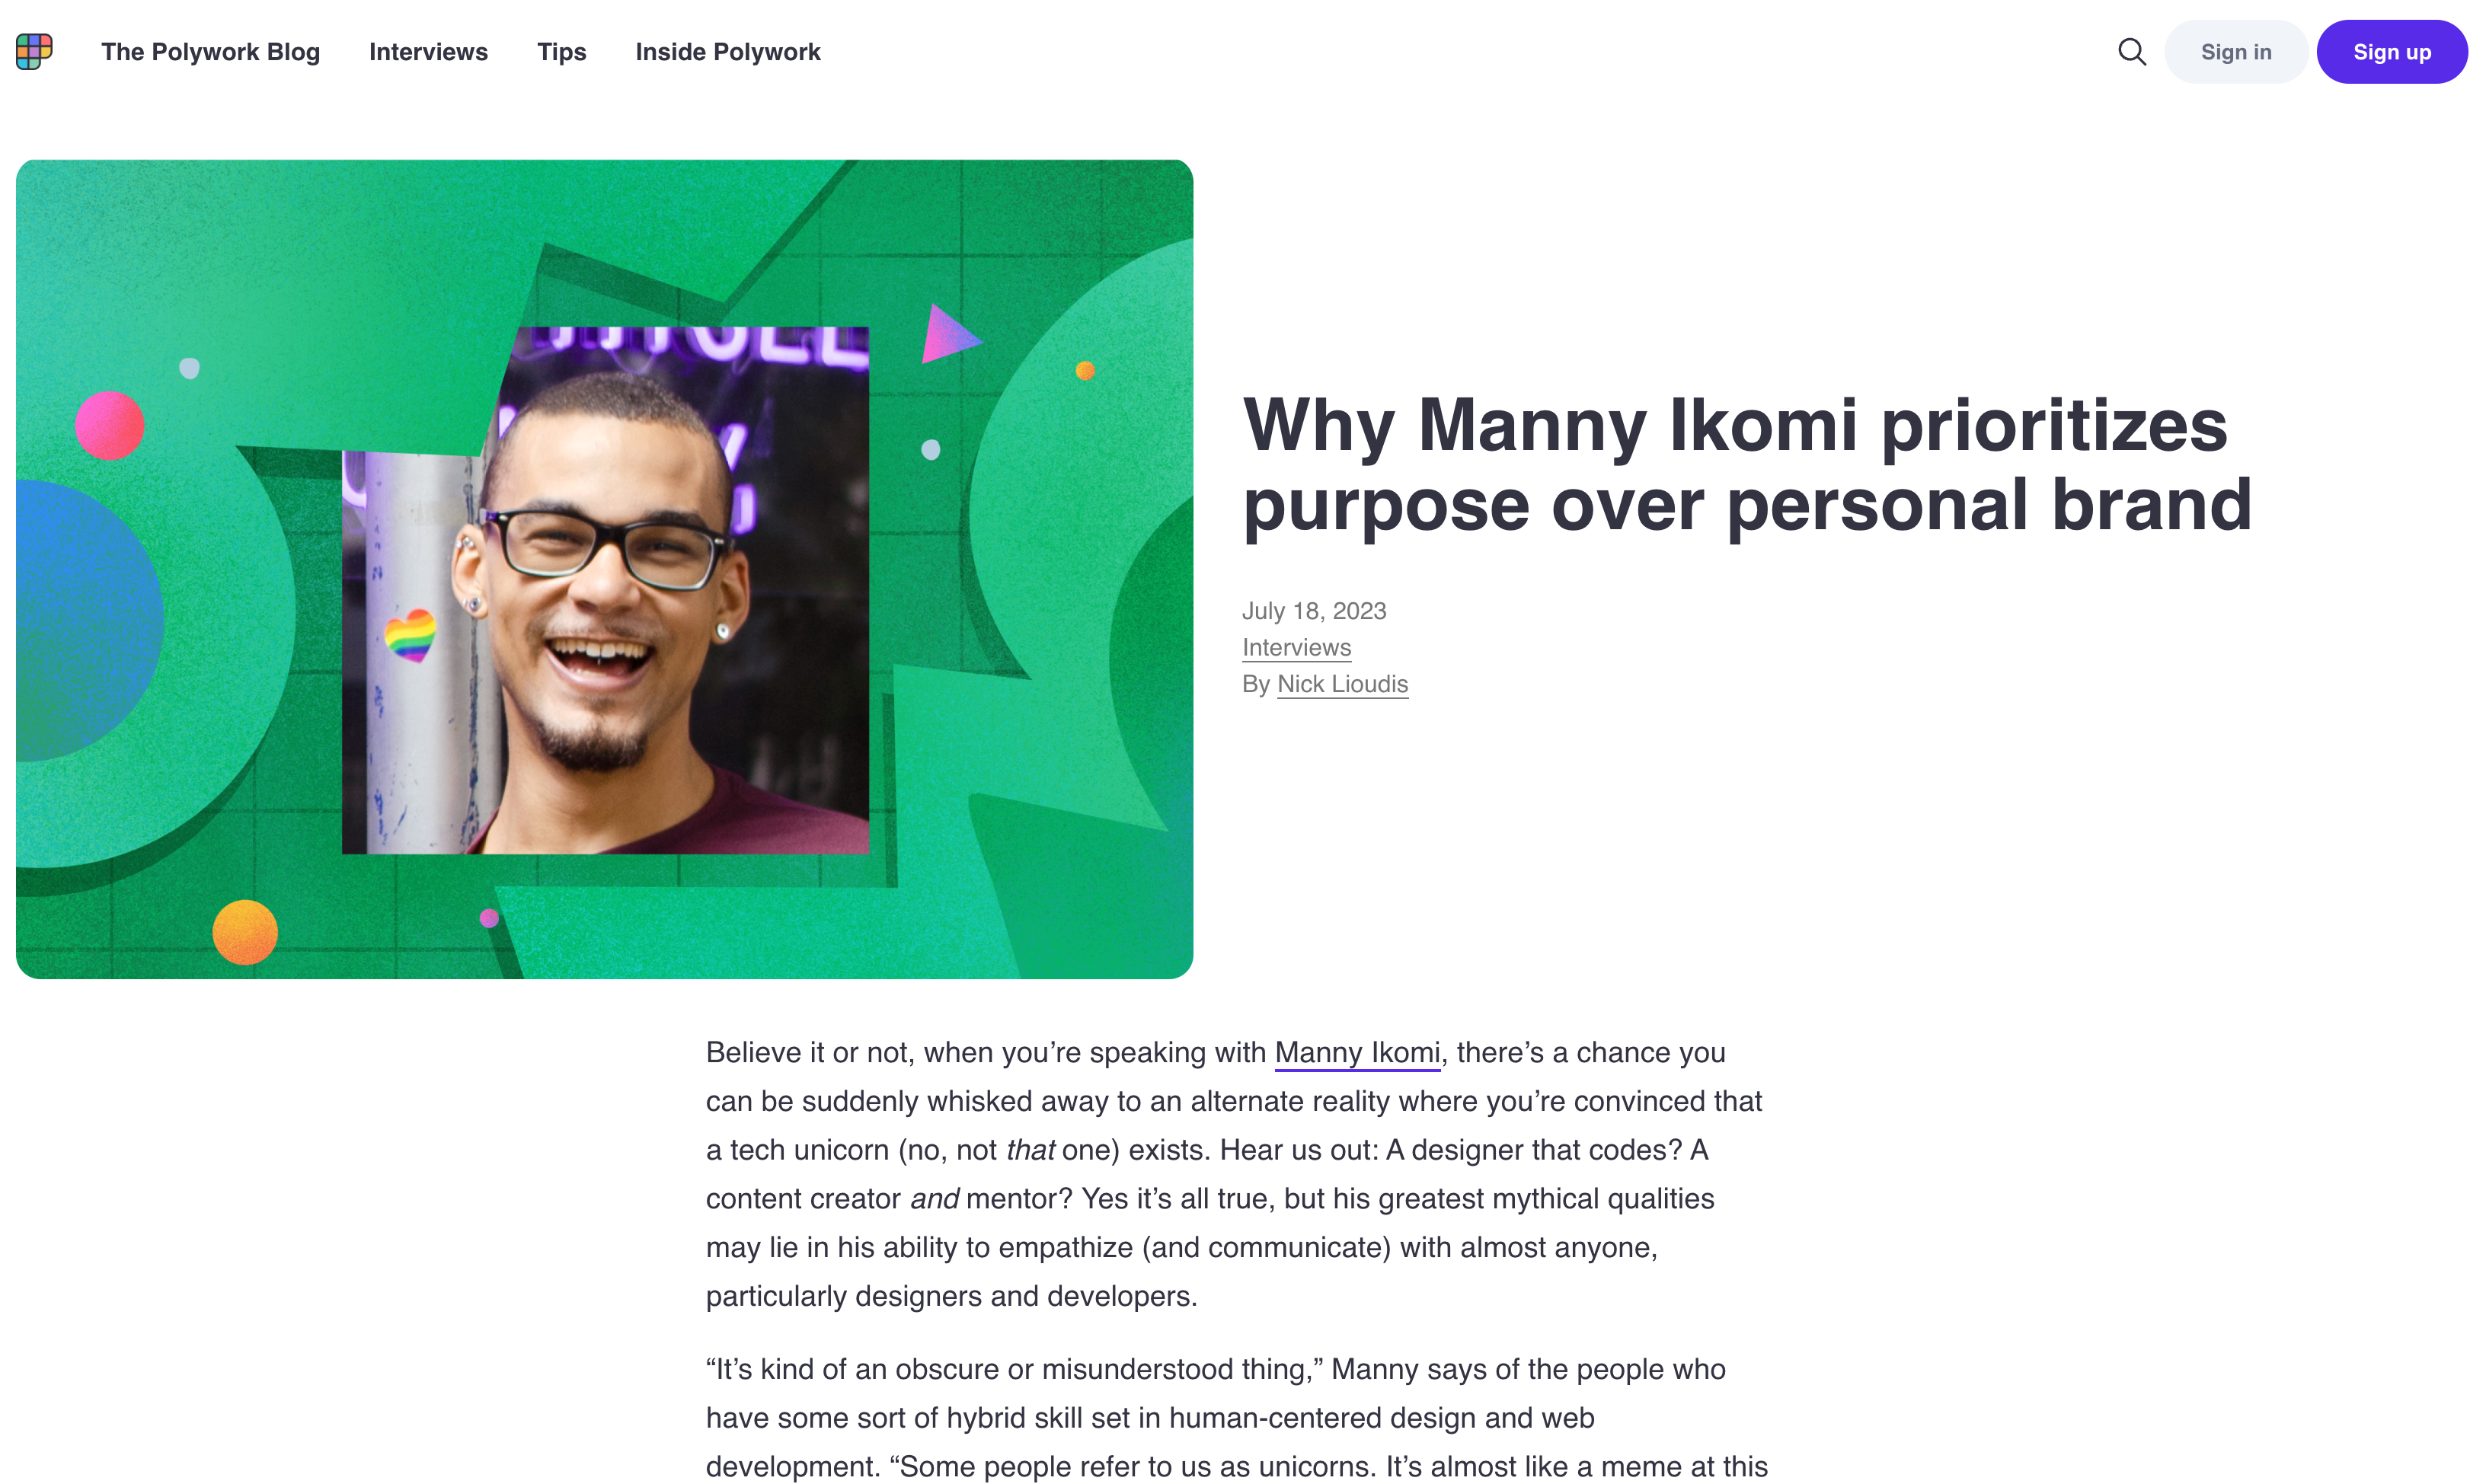 Blog post preview featuring a headshot of Manny on top of a green abstract background and the article title "Why Manny Ikomi prioritizes purpose over personal brand"